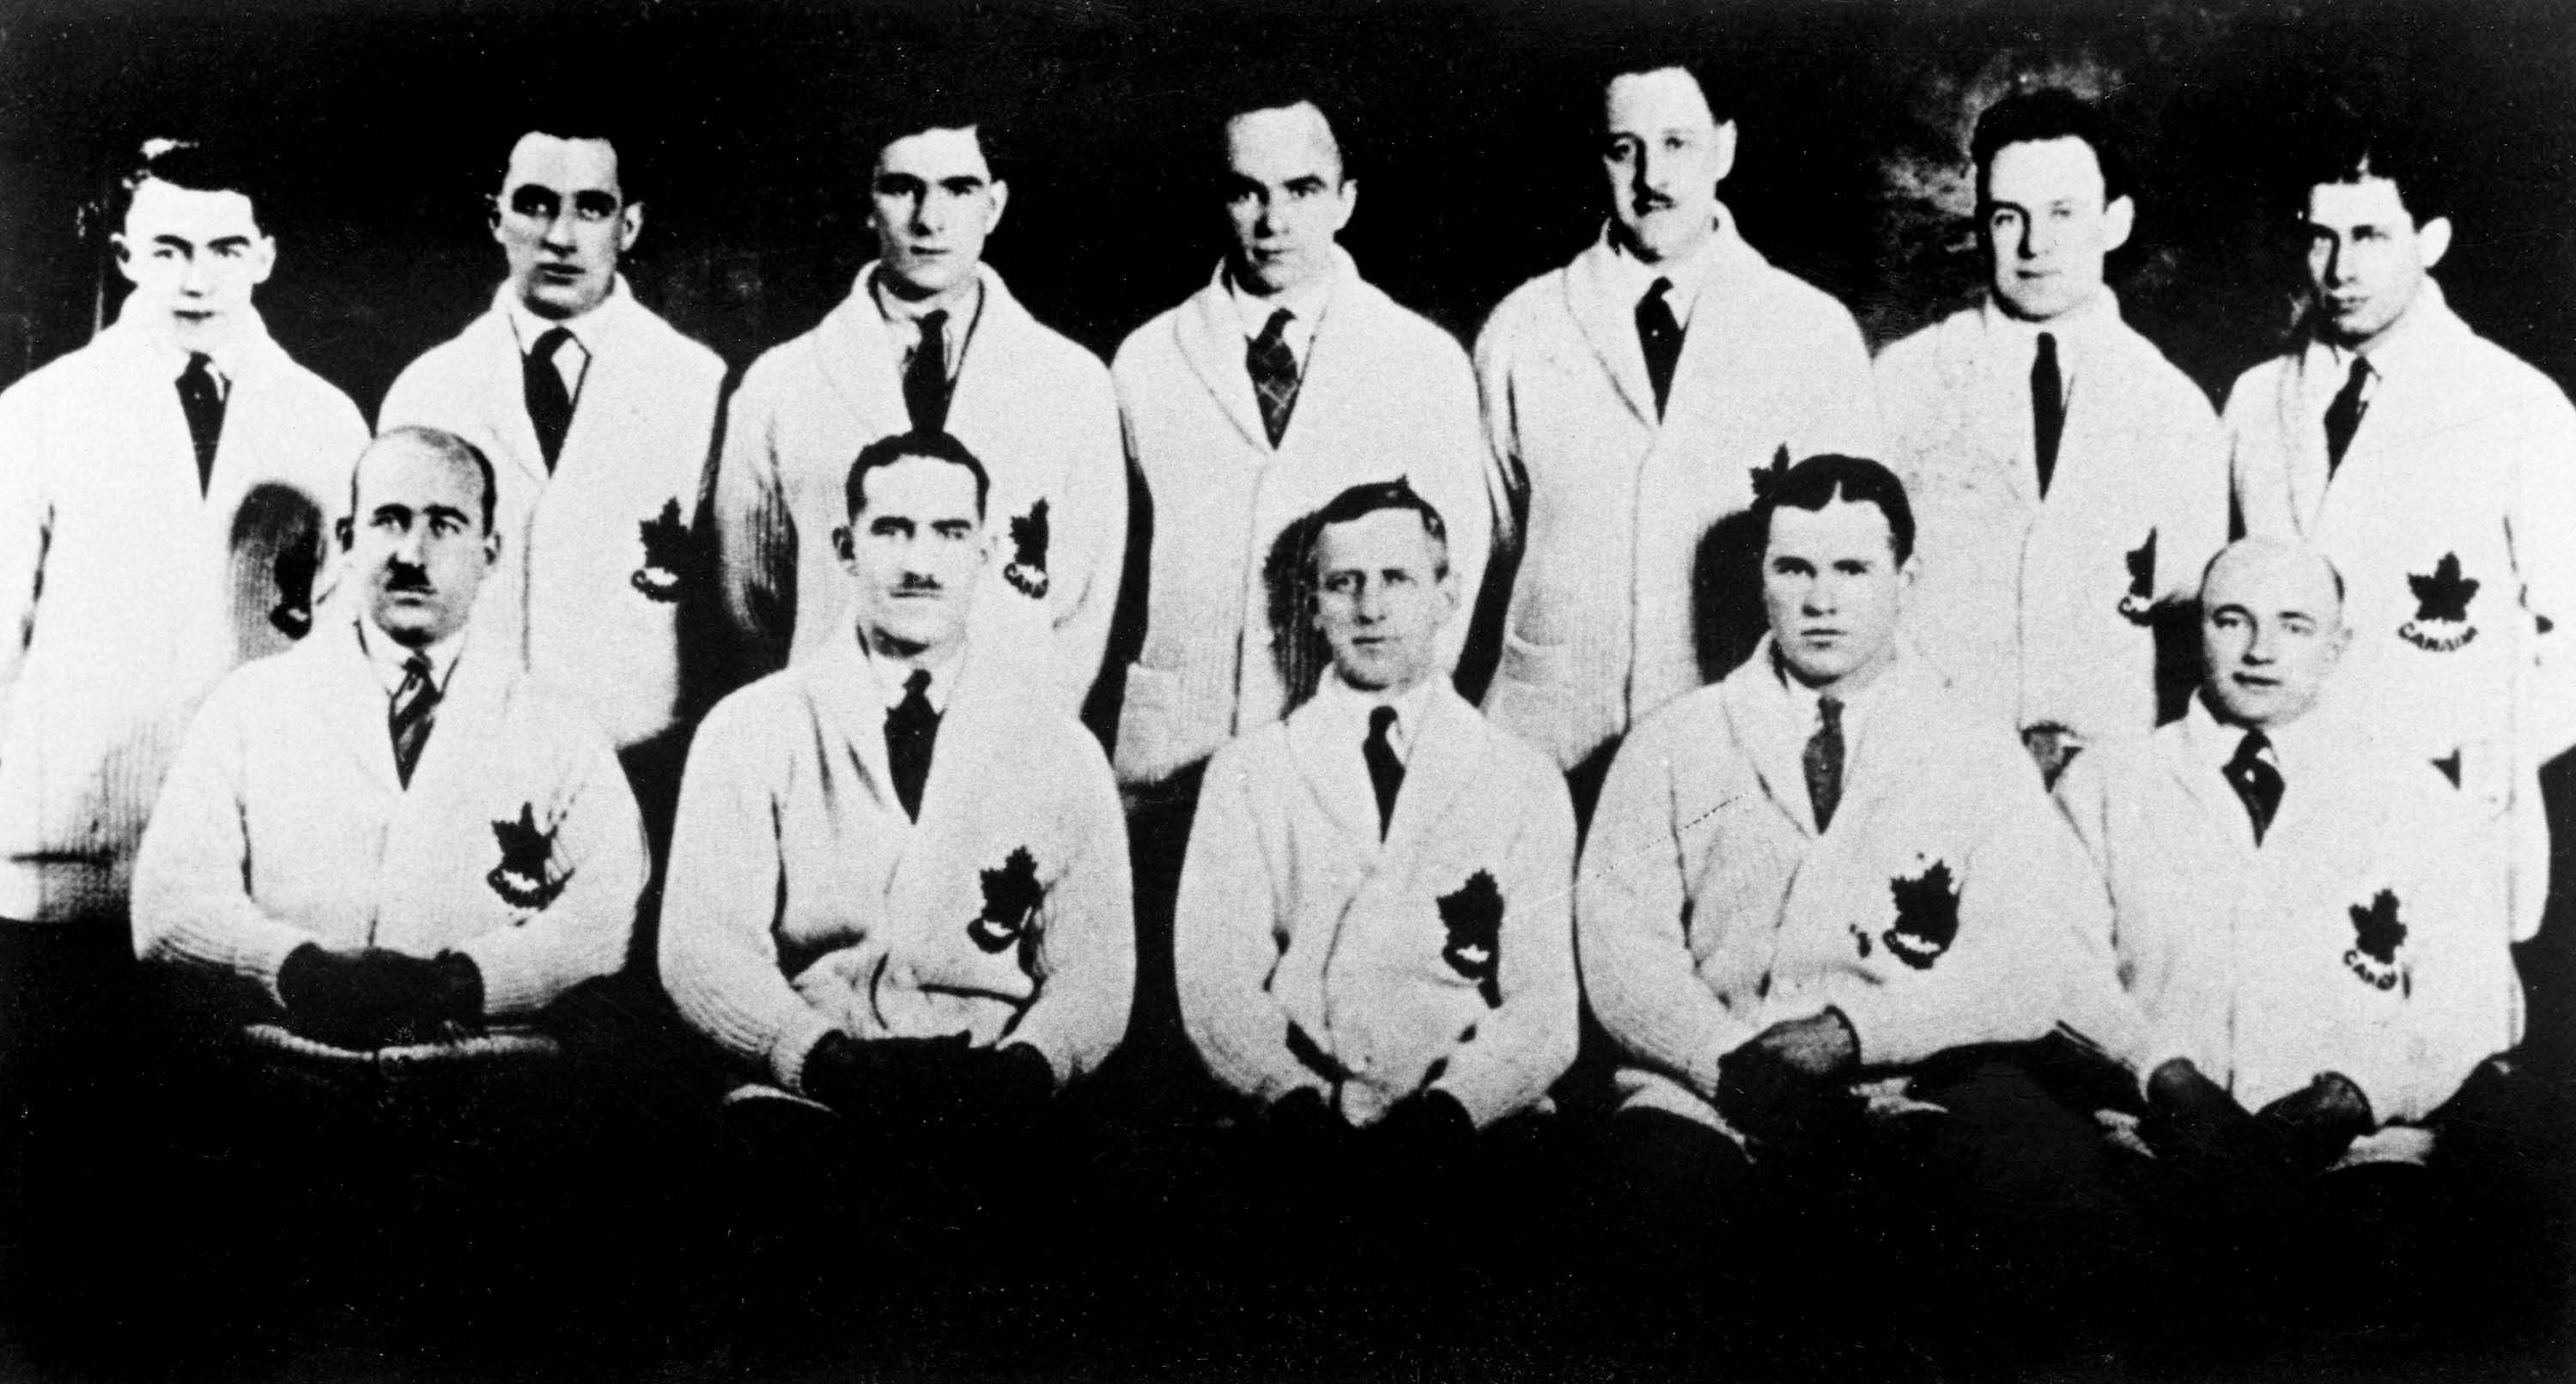 Canada's Olympic hockey team, the Toronto Granites, poses at the Chamonix 1924 Olympic Winter Games